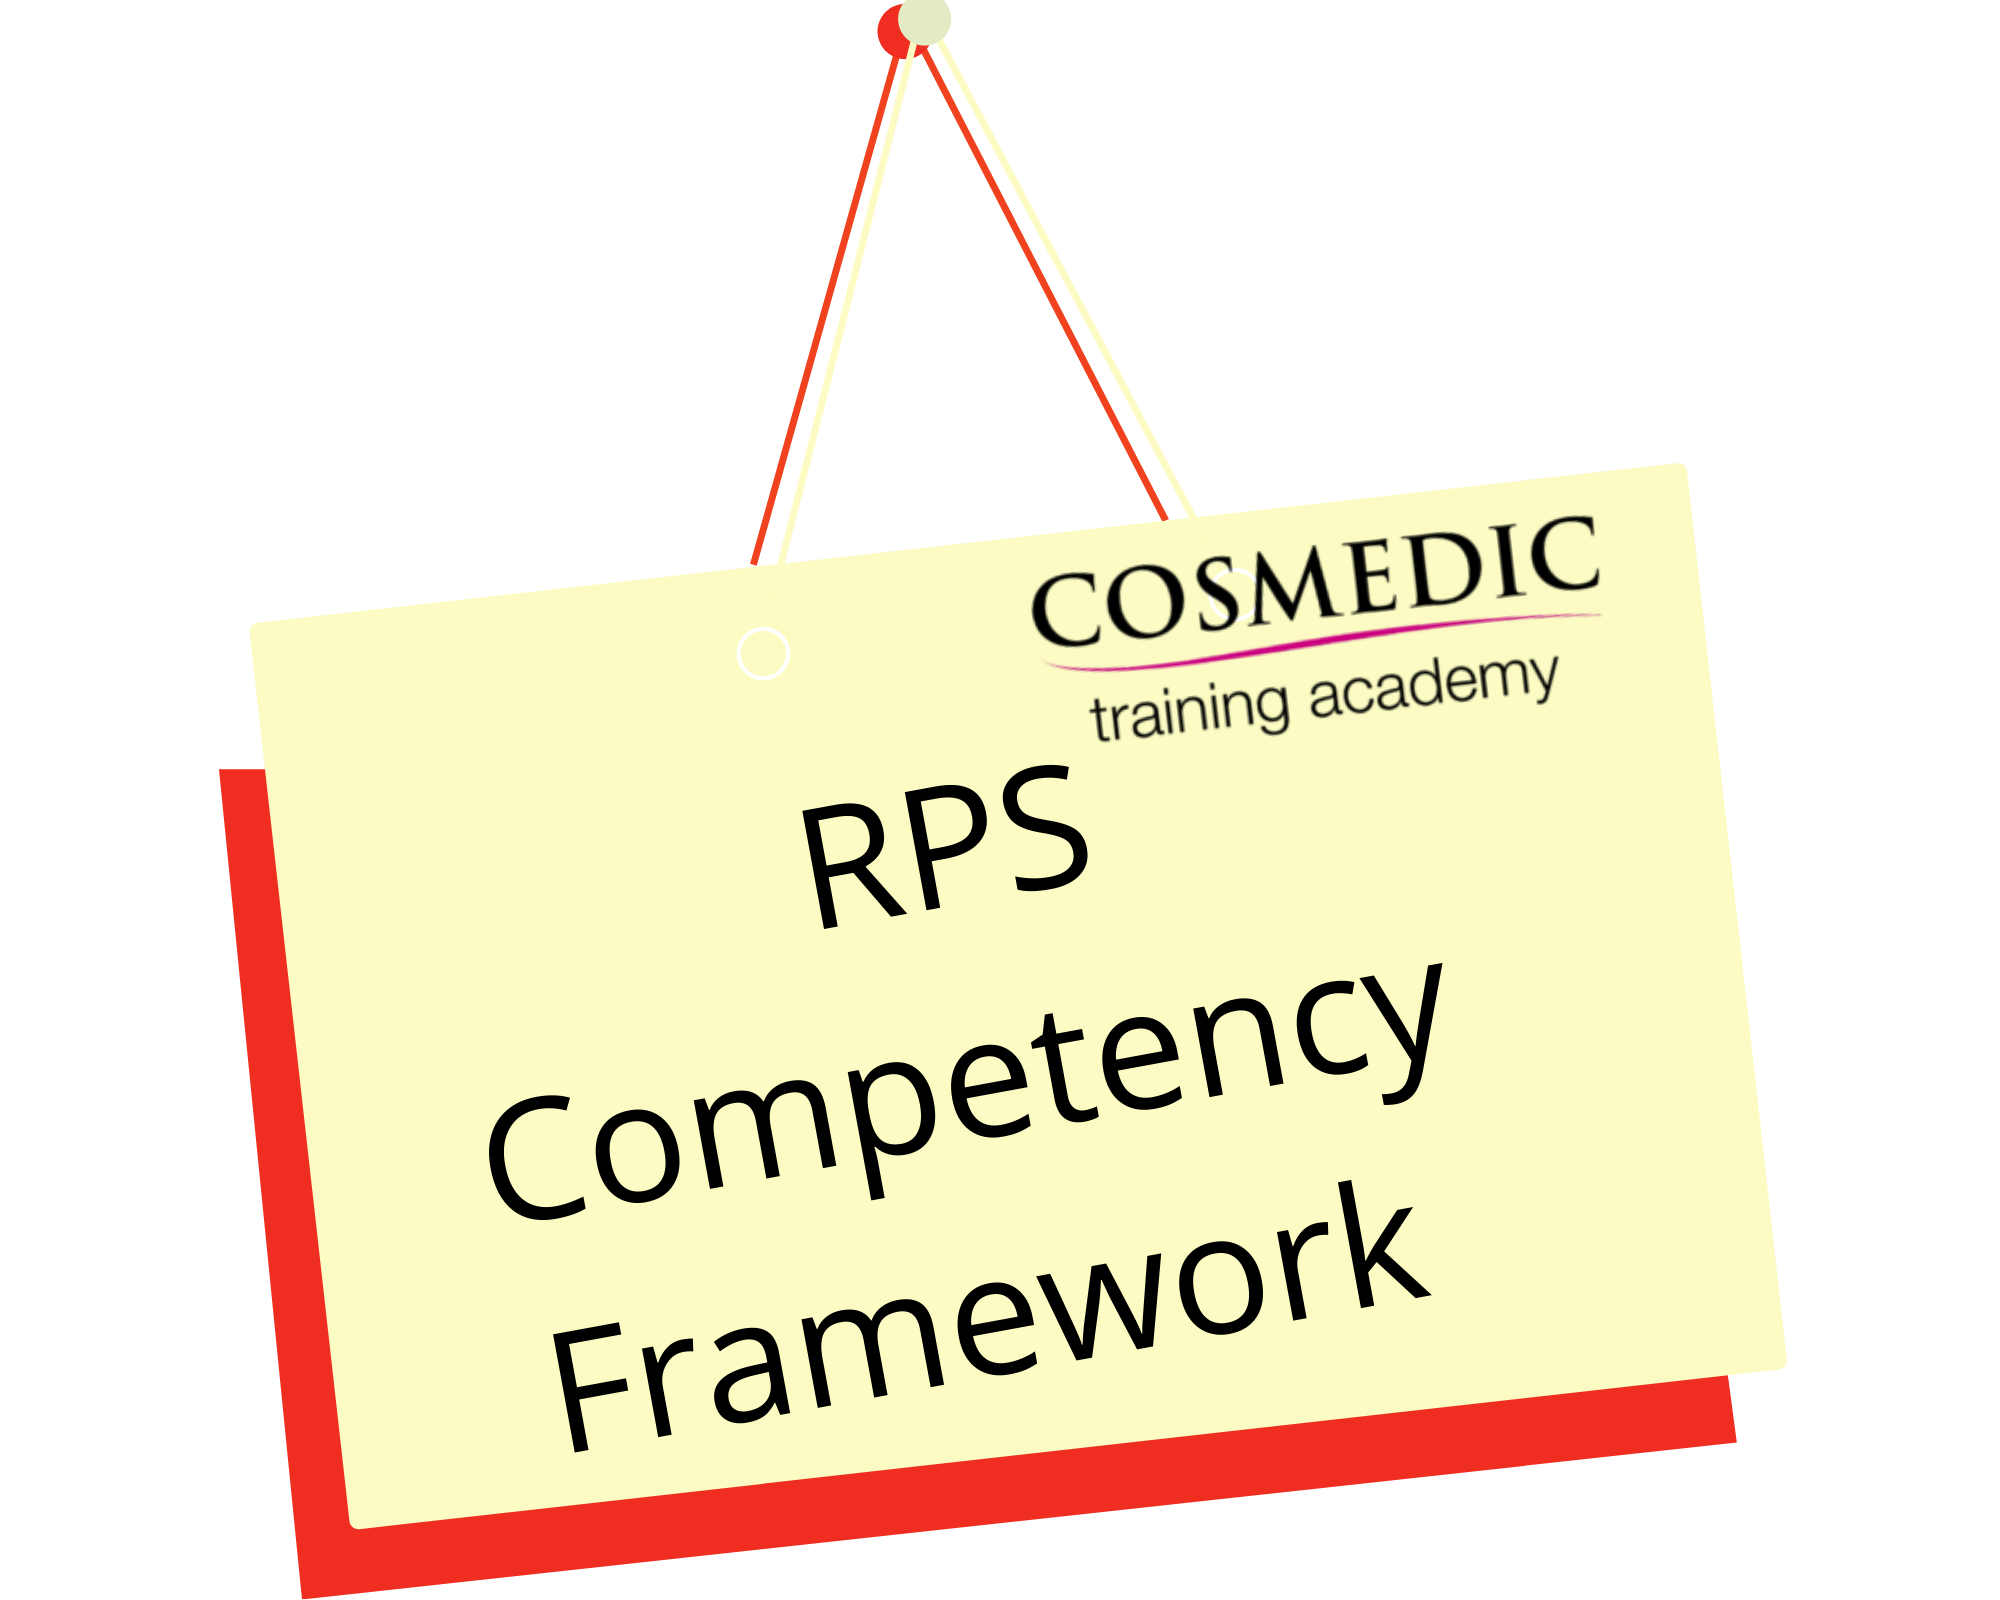 Protected: The Royal Pharmaceutical Society Competency Framework